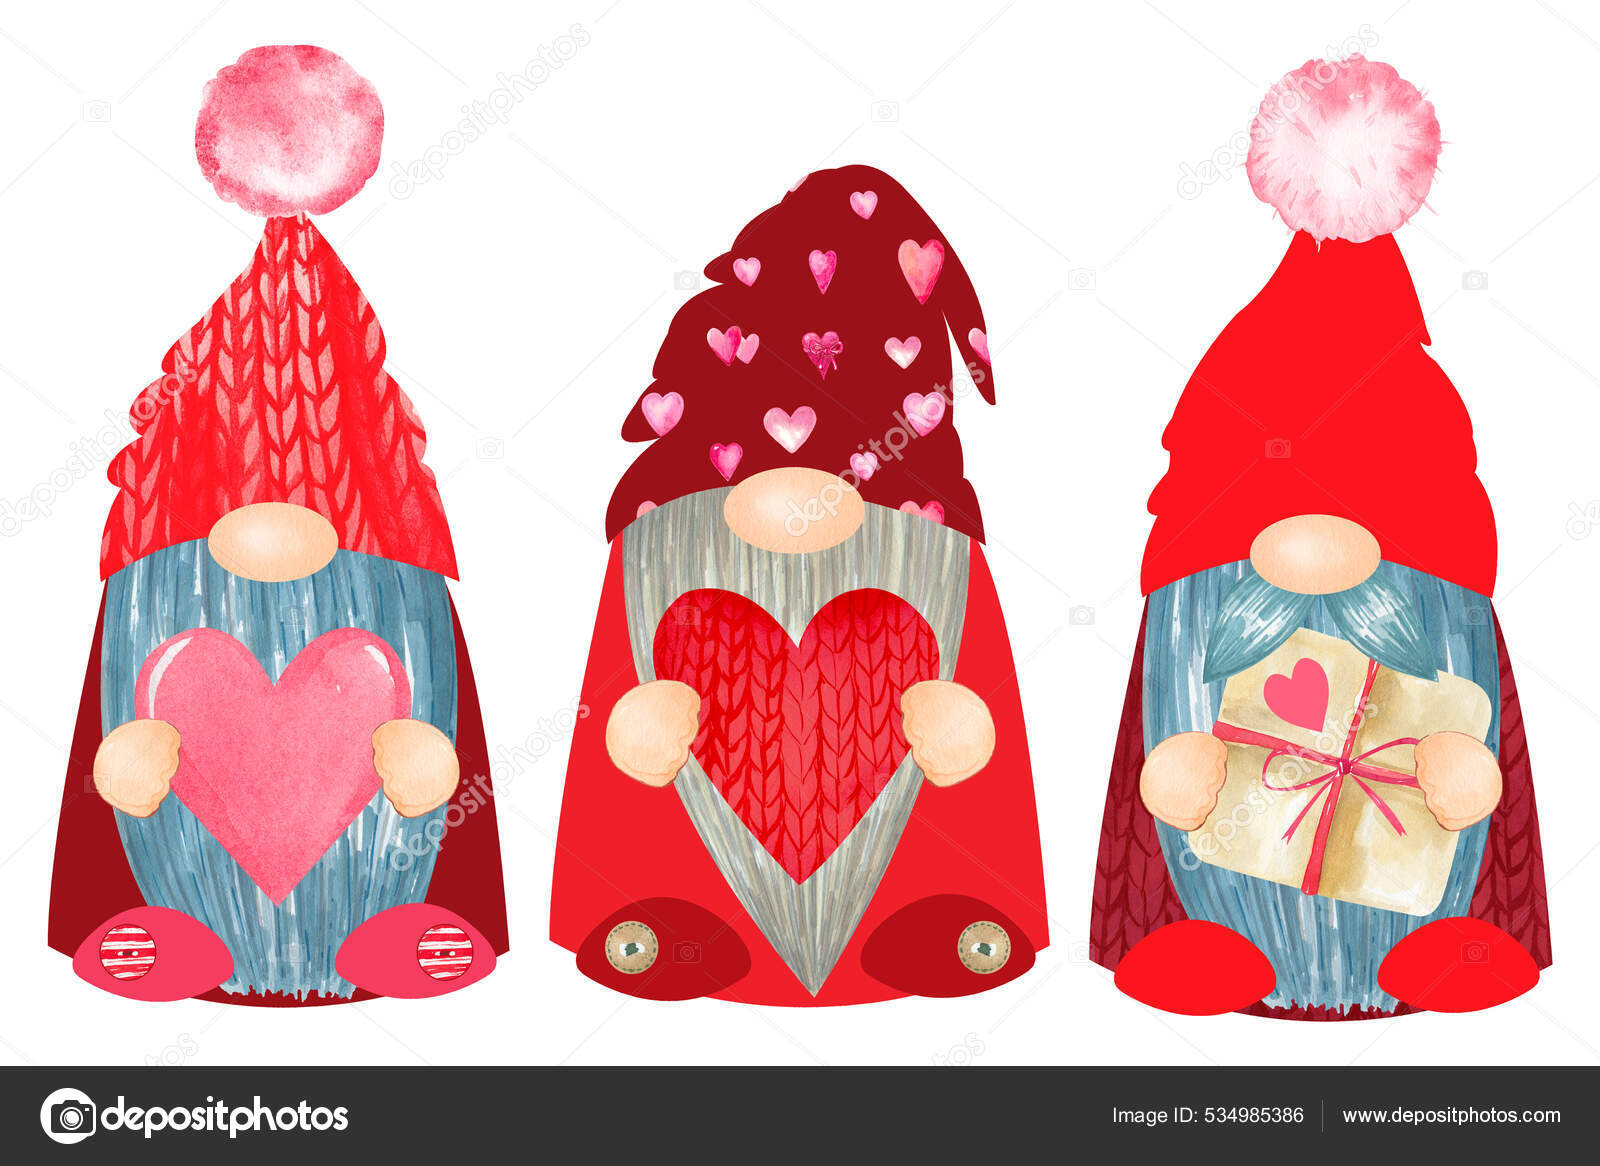 Pin by Susan Hornyak Woods on The word LOVE  Cute christmas wallpaper  Gnome pictures Gnome wallpaper